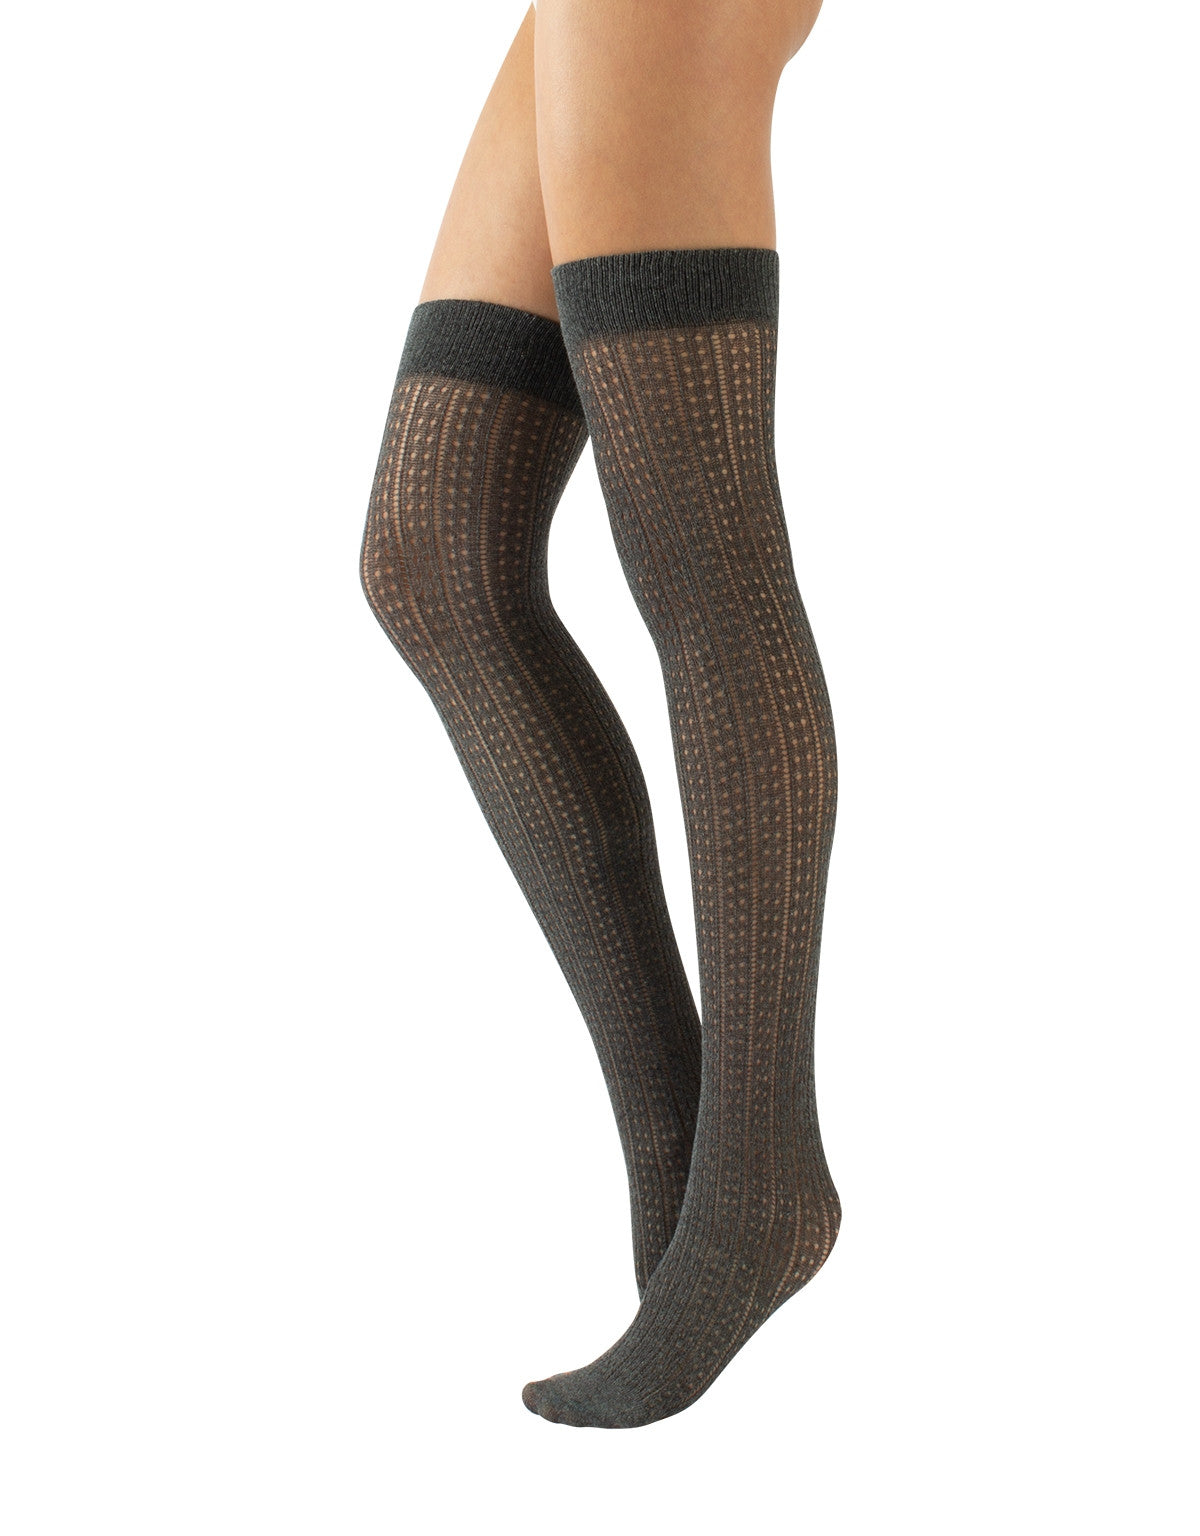 Calzitaly Geometric Over-Knee Socks - Knitted grey over the knee socks with an openwork spotted vertical rib style pattern, plain elasticated cuff and plain toe.